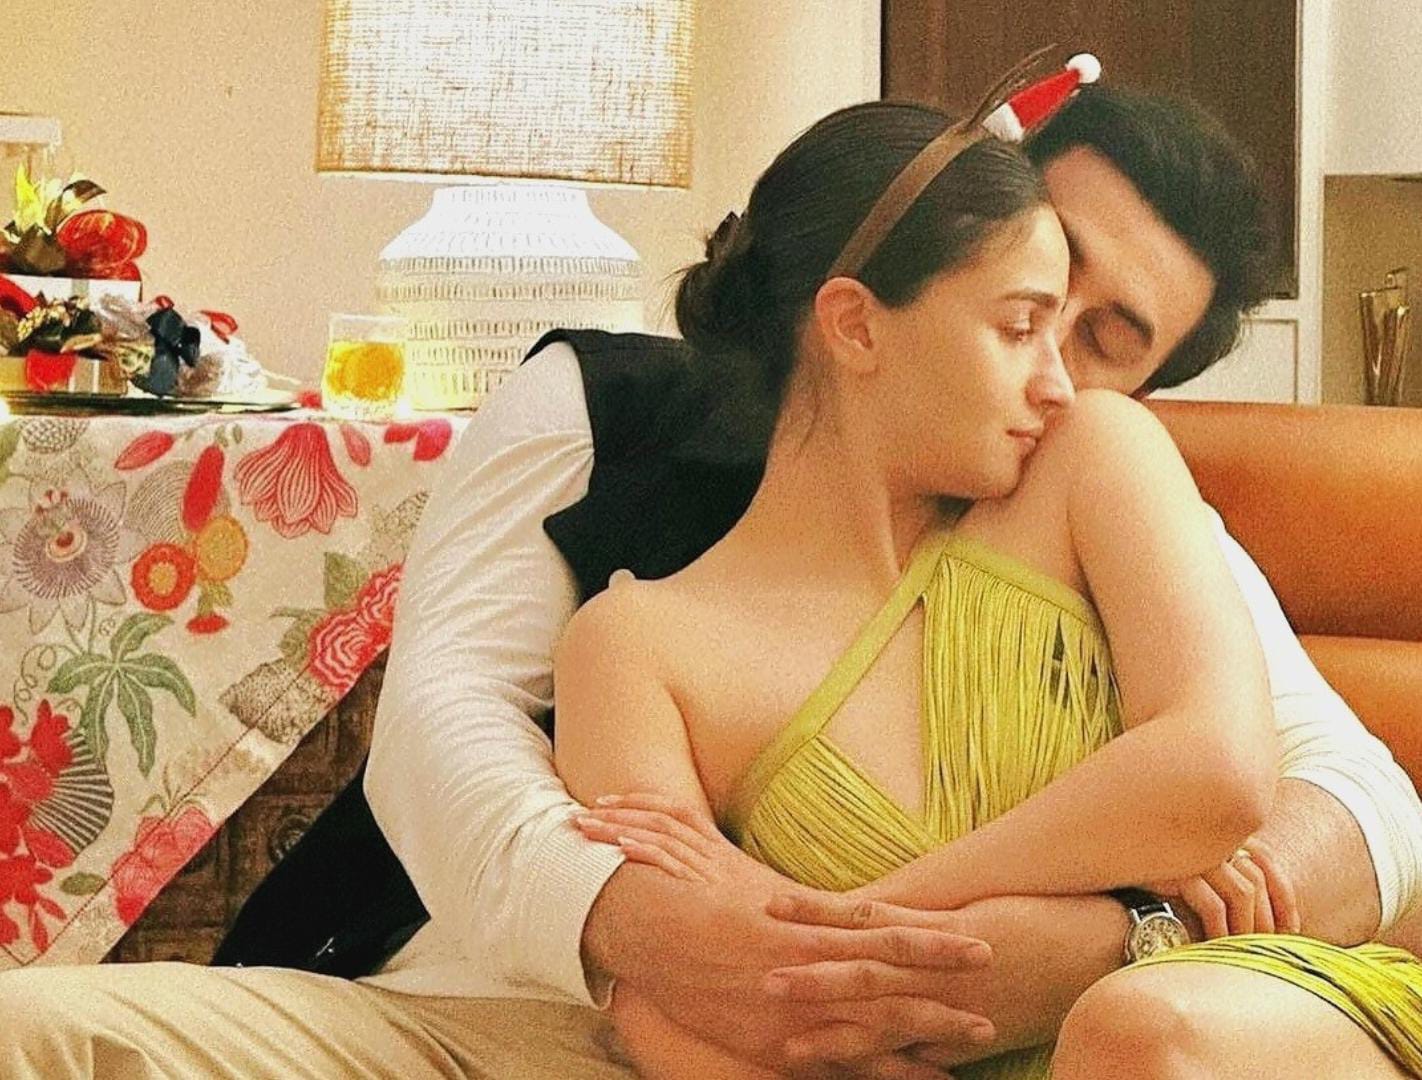 Alia shares lovey-dovey picture with hubby Ranbir from their Christmas celebration, says “Grateful for this…”